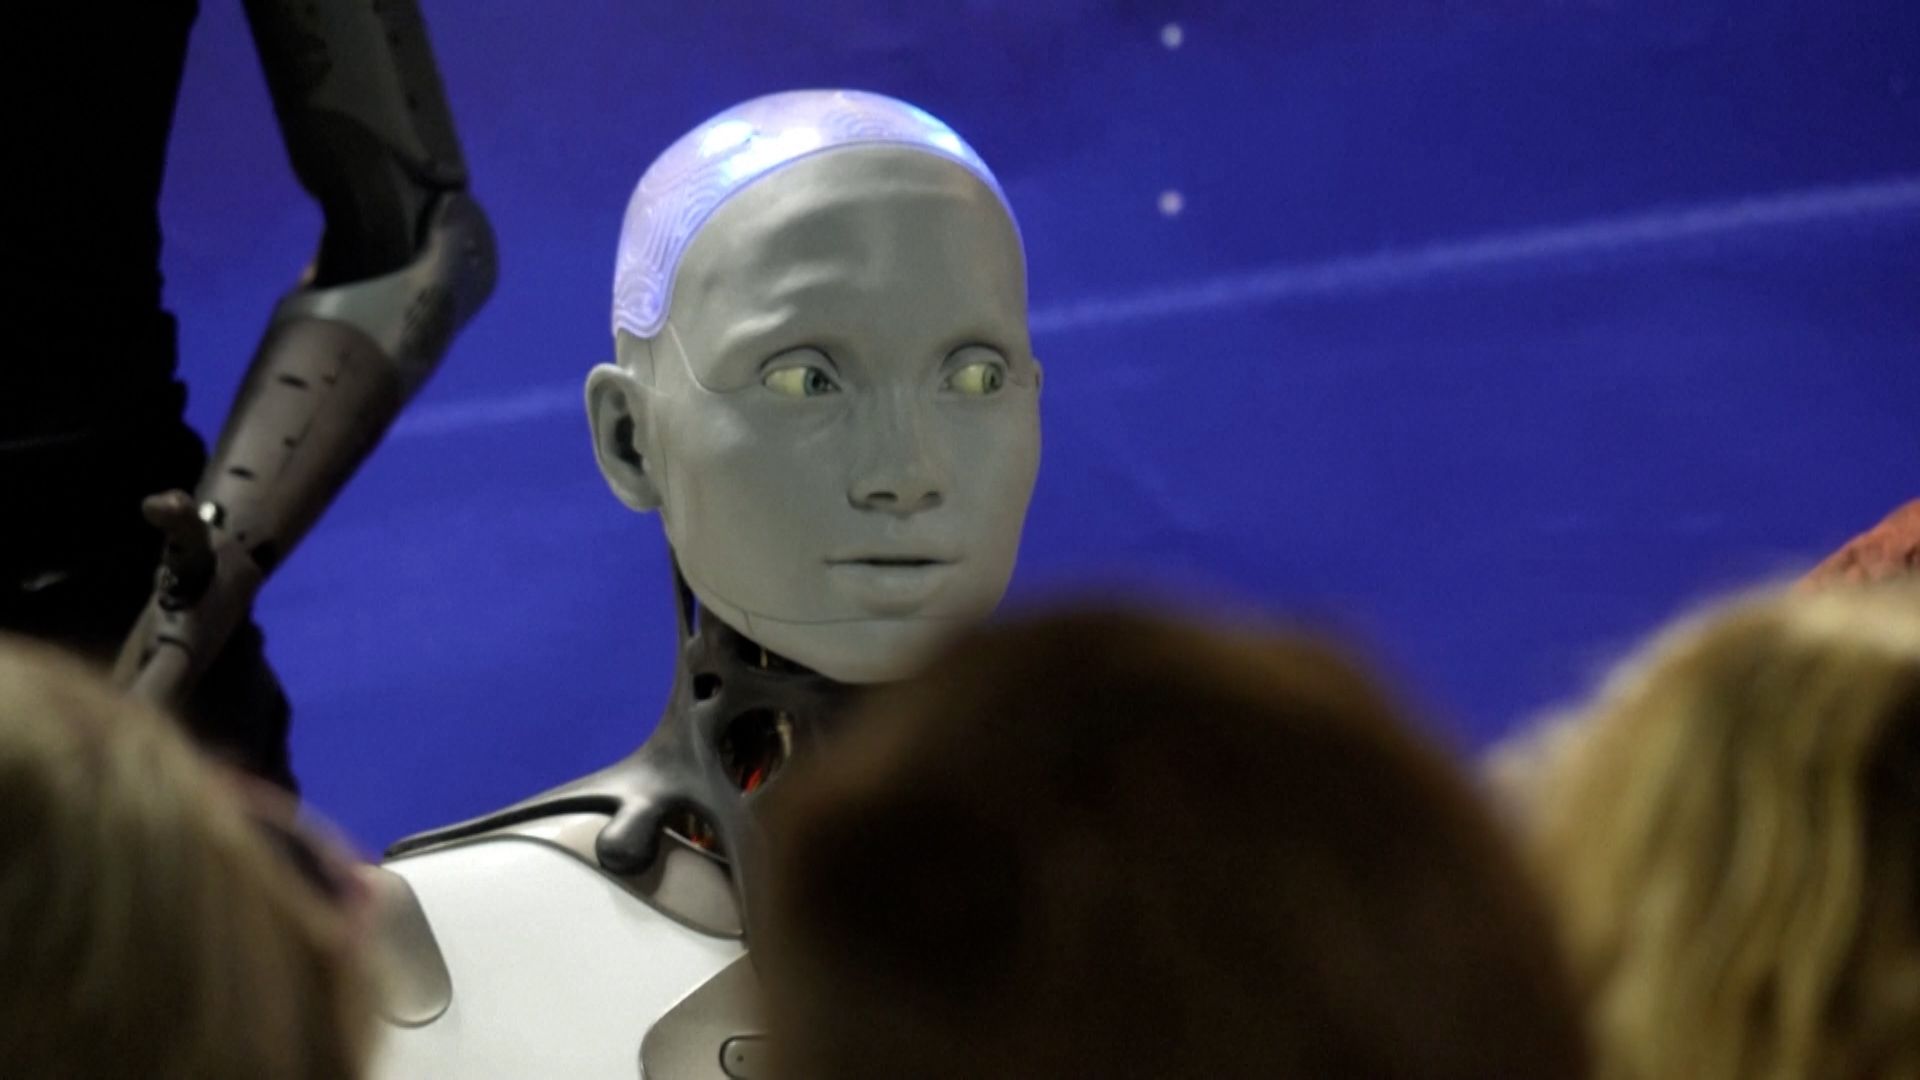 AI-powered humanoid robots field questions from reporters